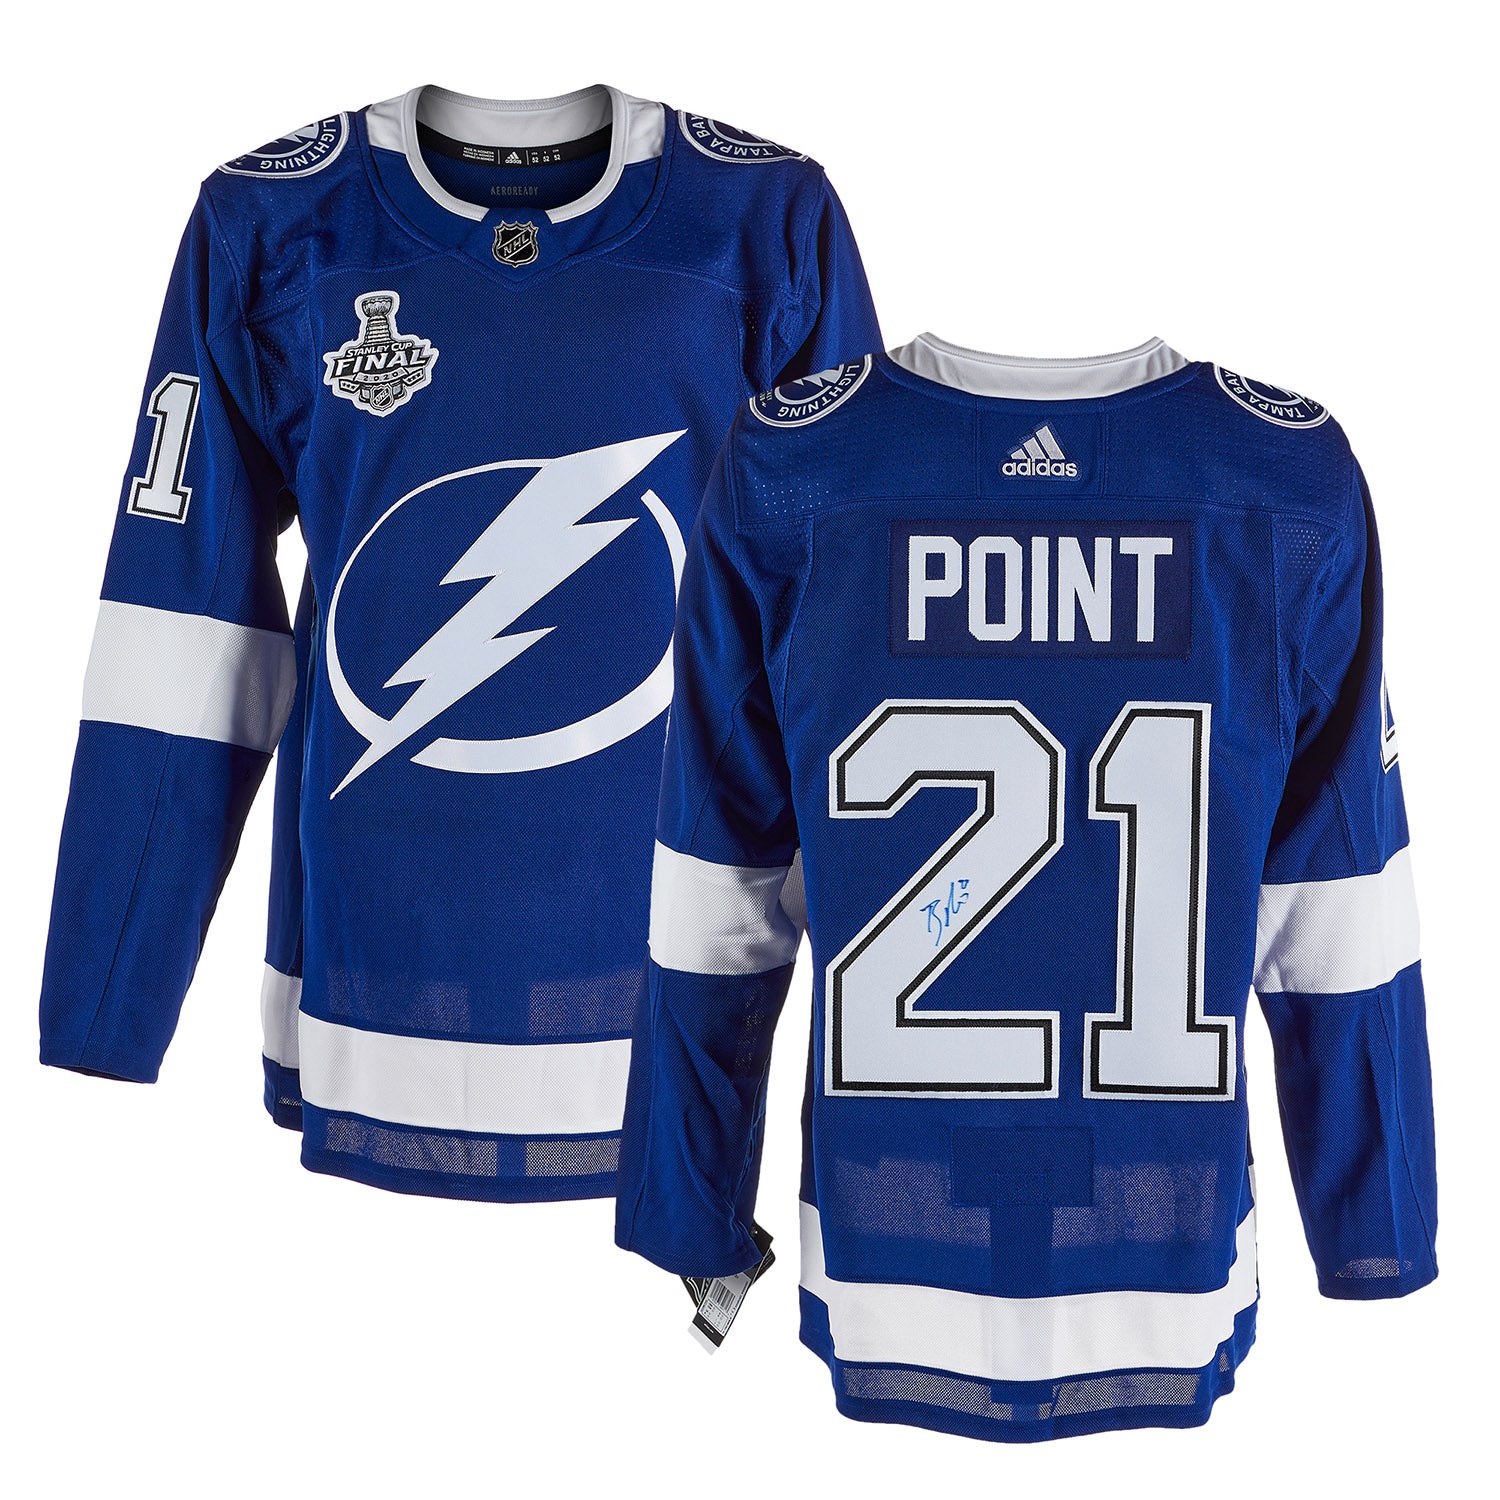 Brayden Point Tampa Bay Lightning Signed 2020 Stanley Cup Adidas Jersey